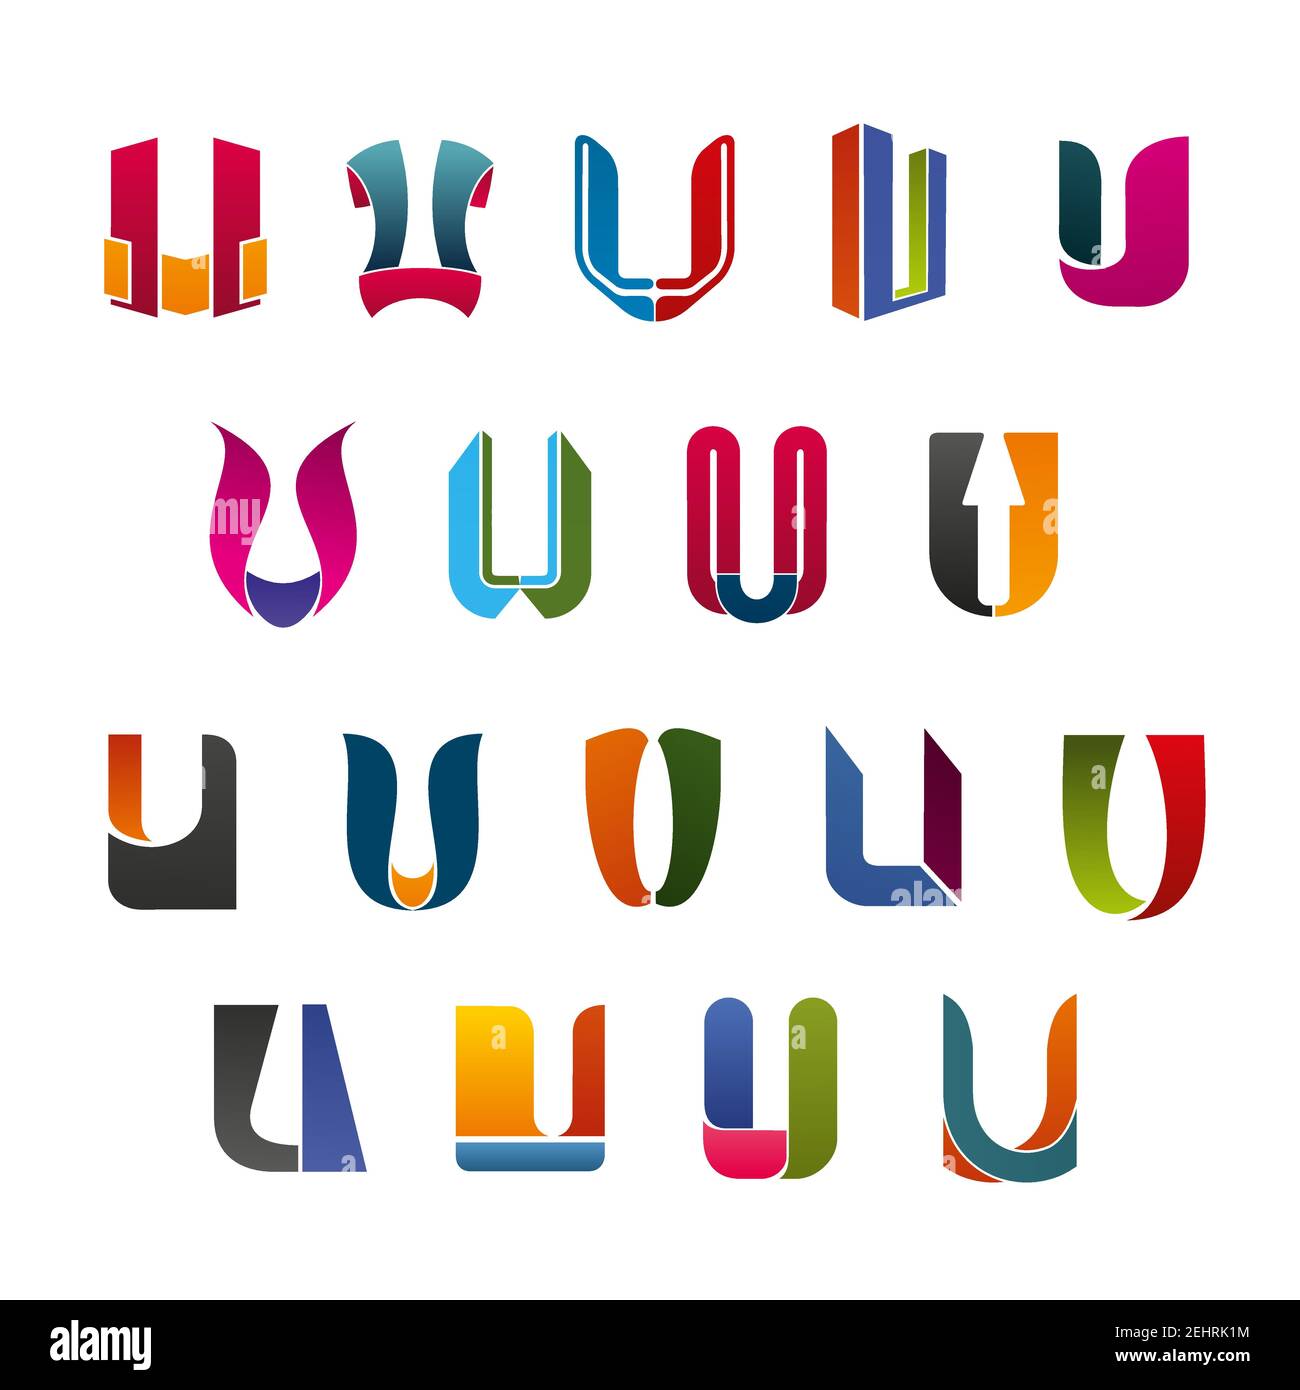 Letter V and U abstract icons, different colors and shapes. Alphabetic symbols of unusual forms of products or services, companies and trade. Vector s Stock Vector